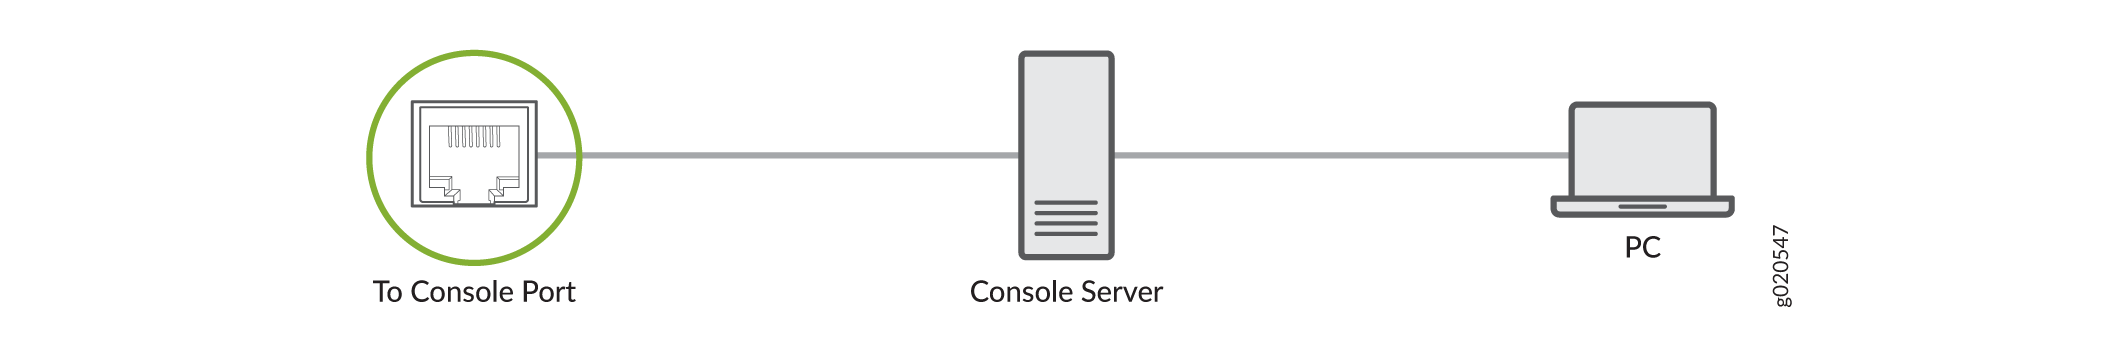 Connecting Your Device to a Management Console through a Console Server